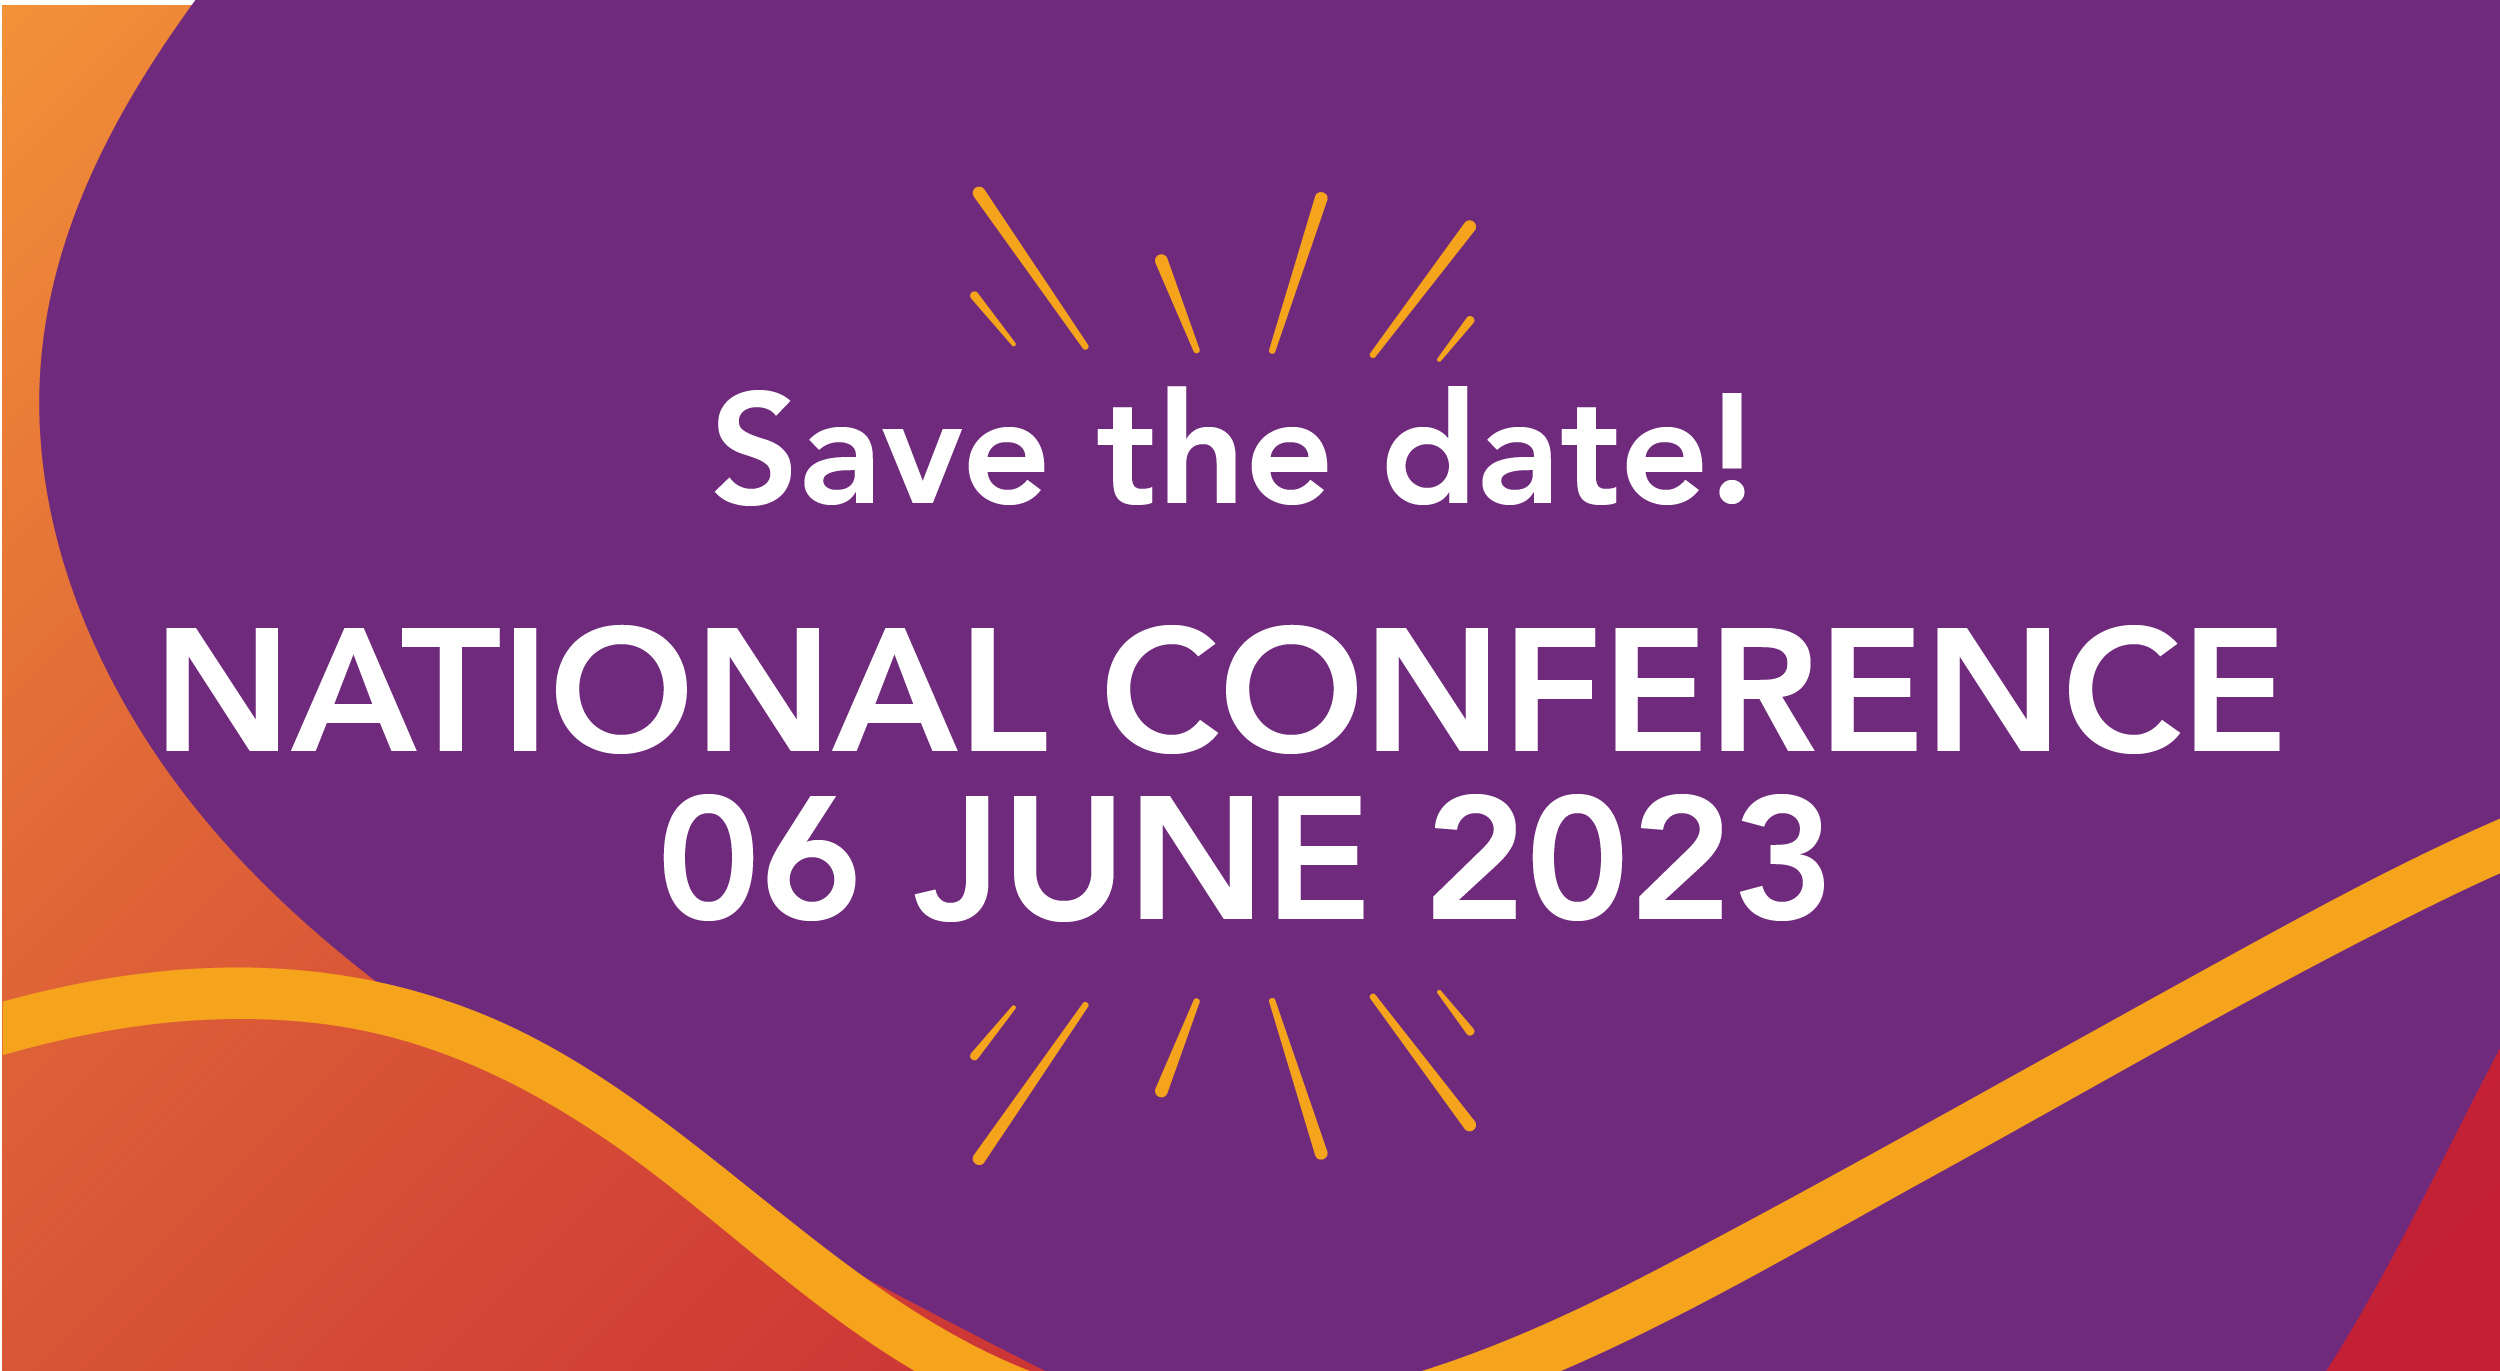 Save the Date! National Conference 6 June 2023